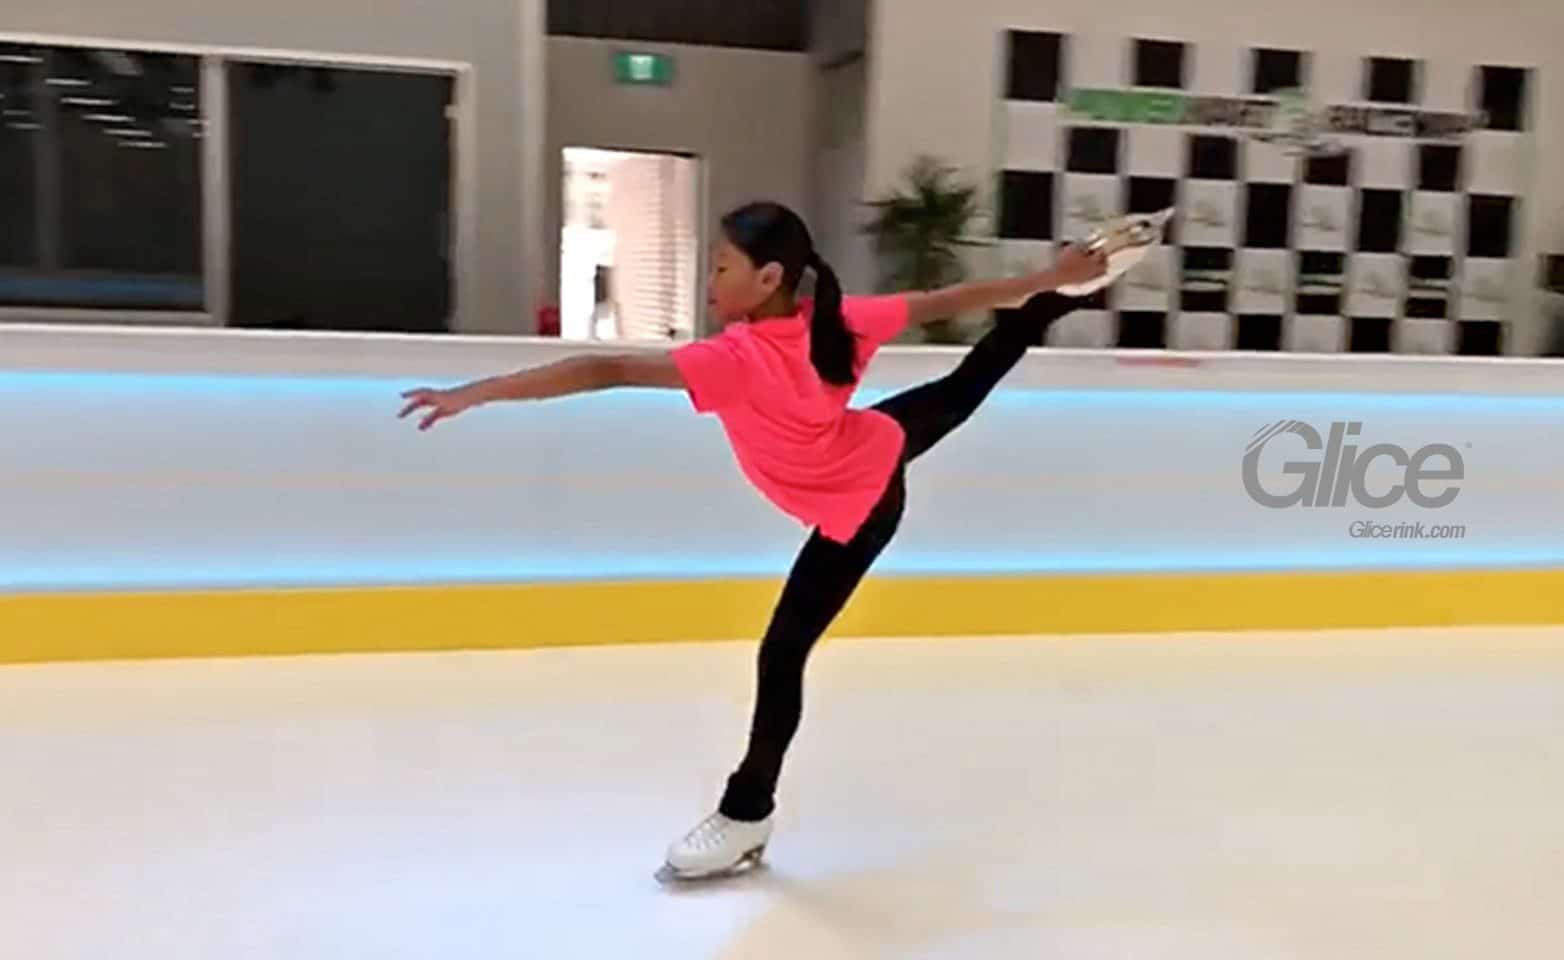 Up and coming figure skater on first synthetic ice rink in Melbourne